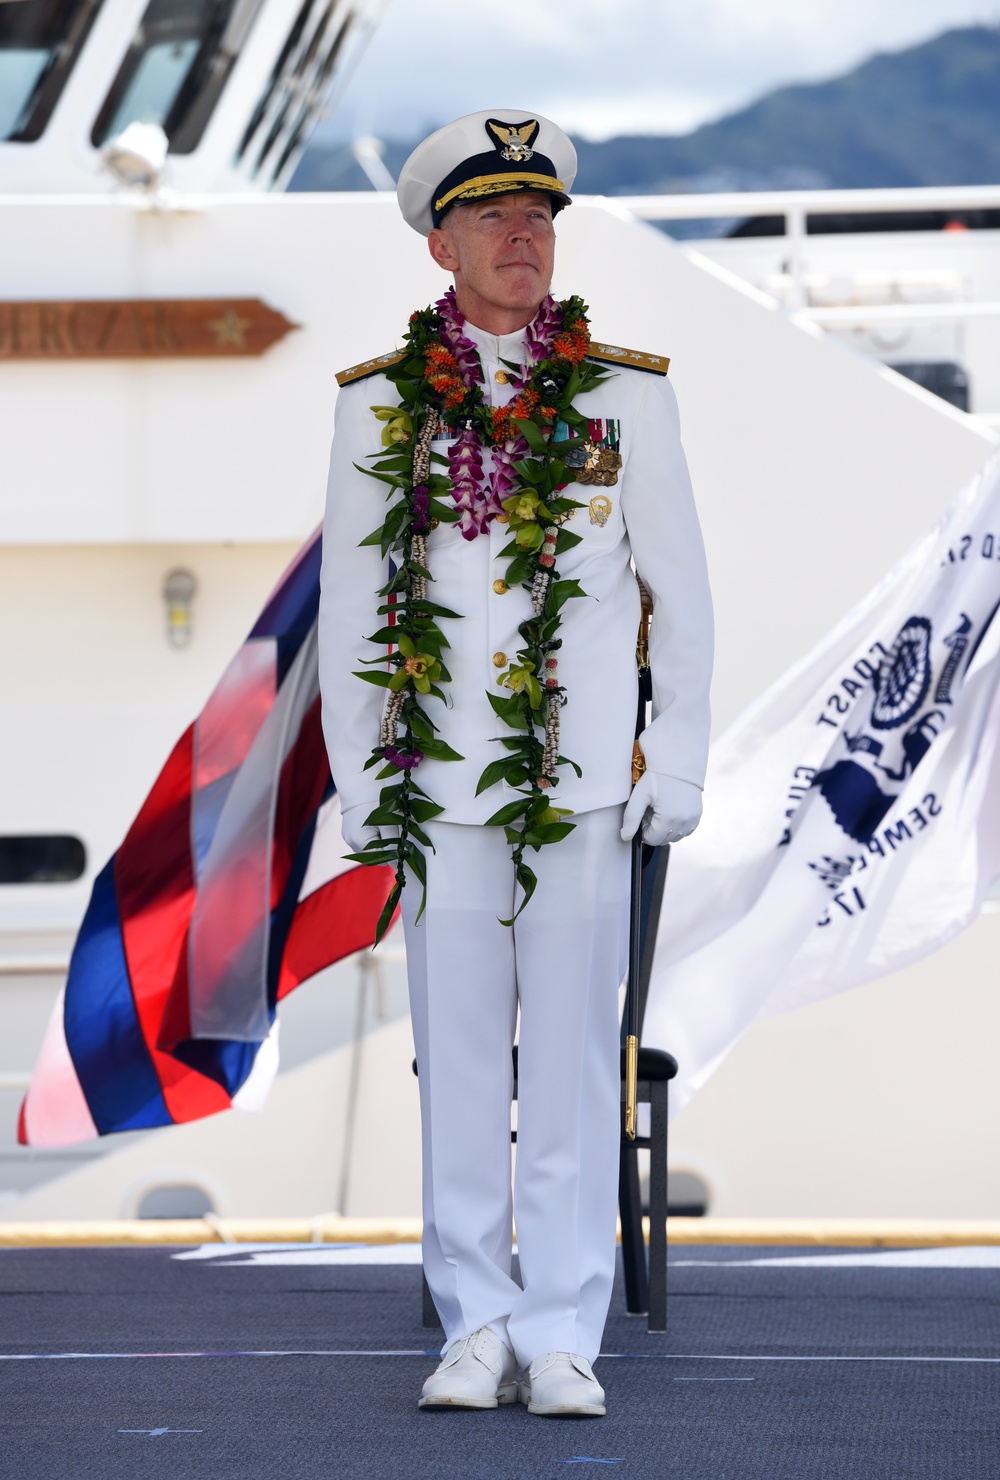 Rear Adm. Kevin Lunday transfers command of Coast Guard 14th District